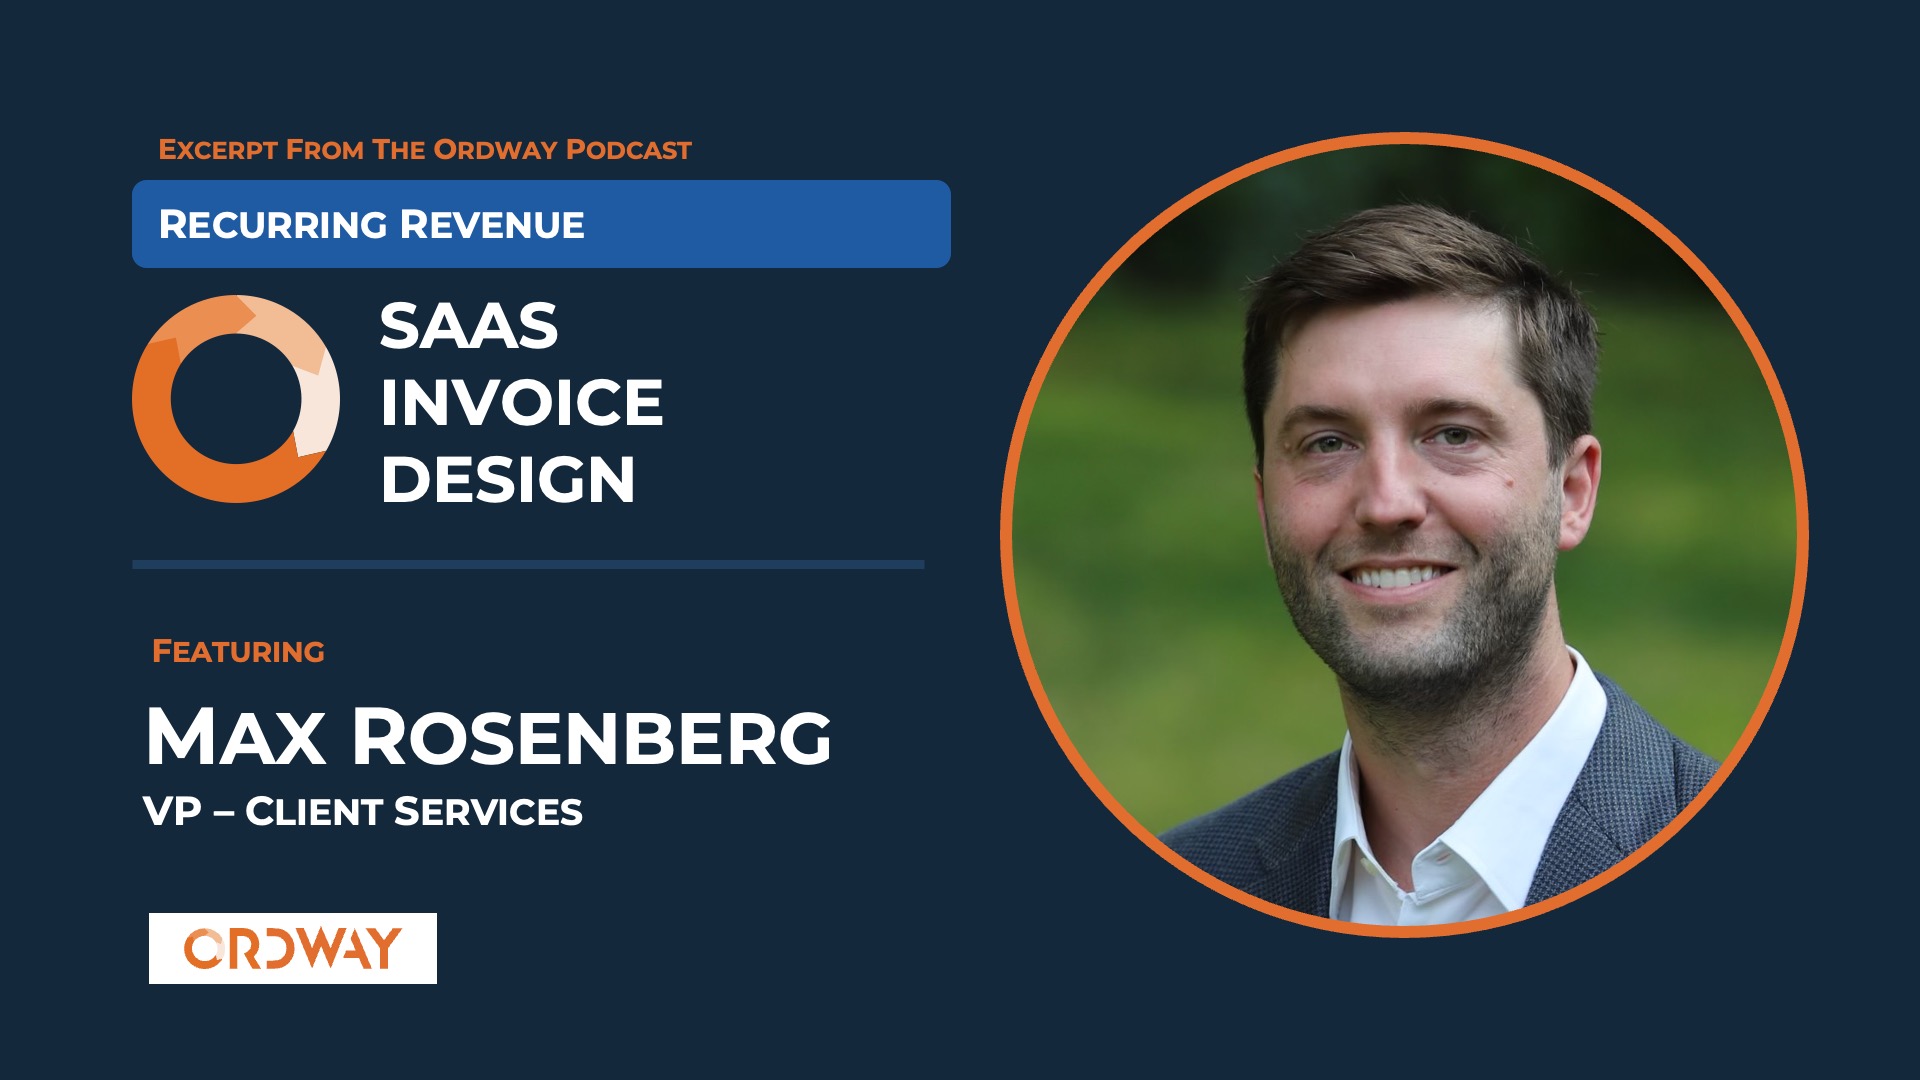 preview image for video on saas invoice design with headshot of max rosenberg vp of client services at ordway